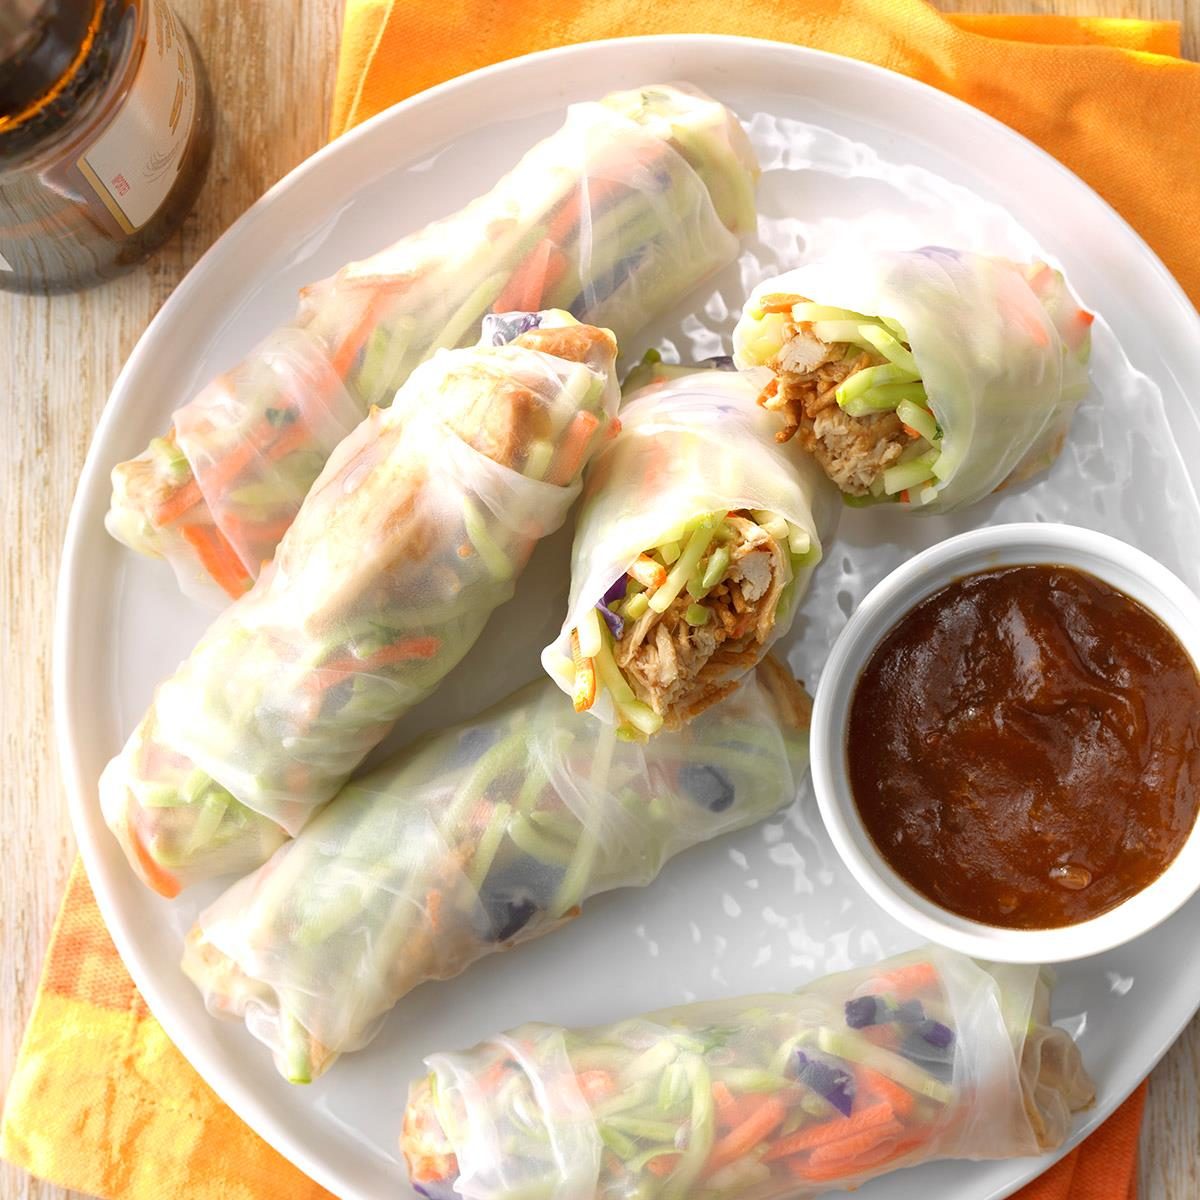 Asian Wraps Recipe: How to Make It